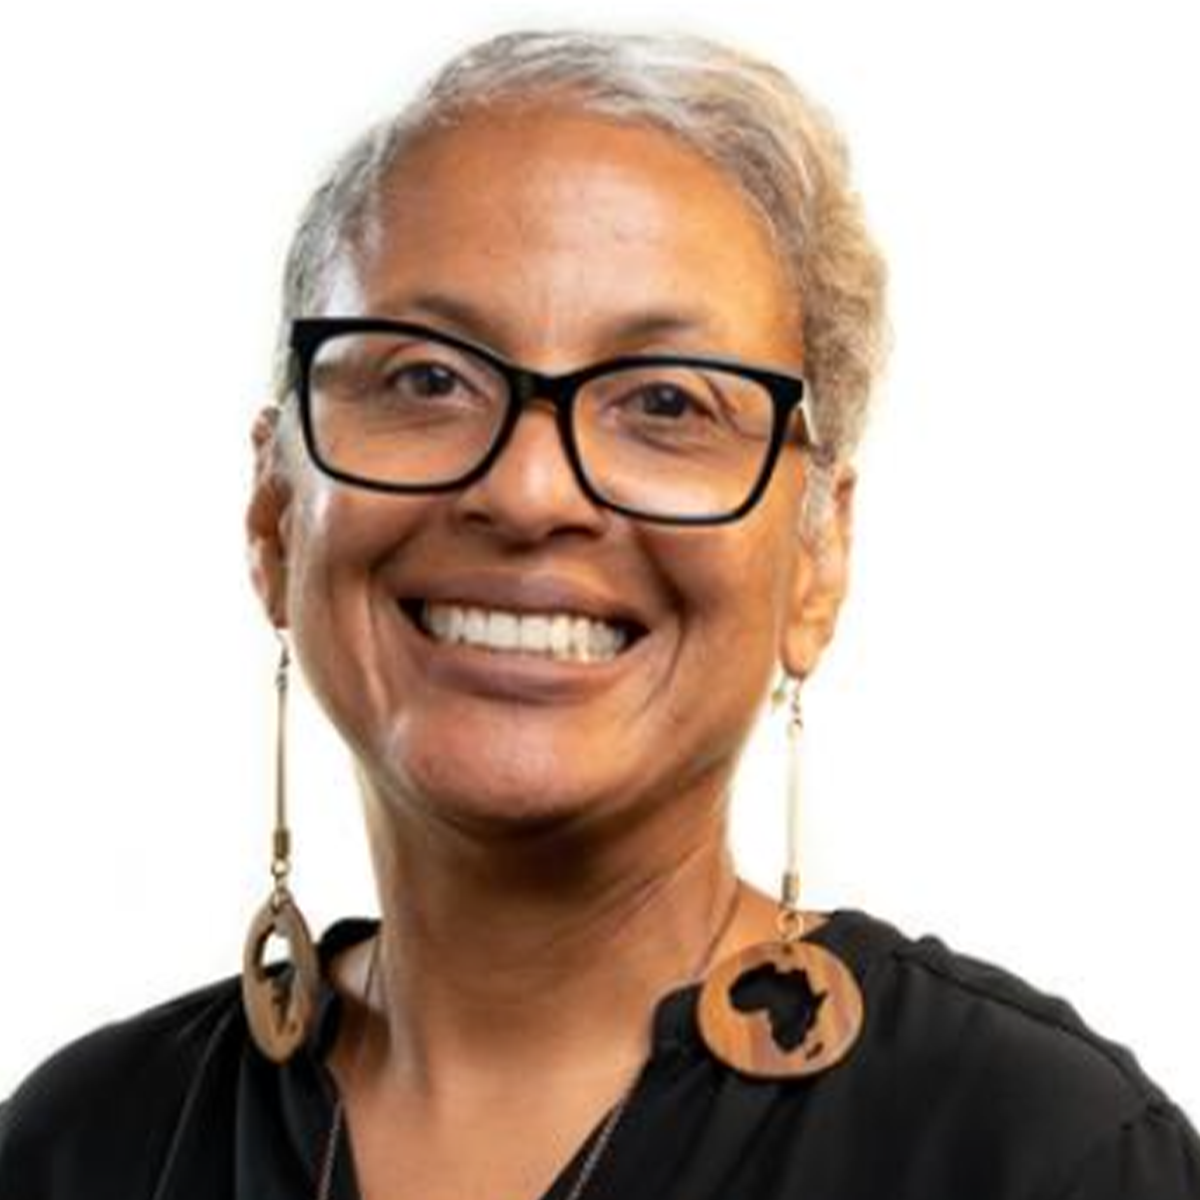 Damali Robertson color portrait. Damali is a Black-bodied woman of Caribbean and American descent; Jamaican by lineage, American by birth. She has short silvery hair, long wooden earrings with the African continent cut out at the center. She is wearing a black top, glasses, and is posed in front of a white background.